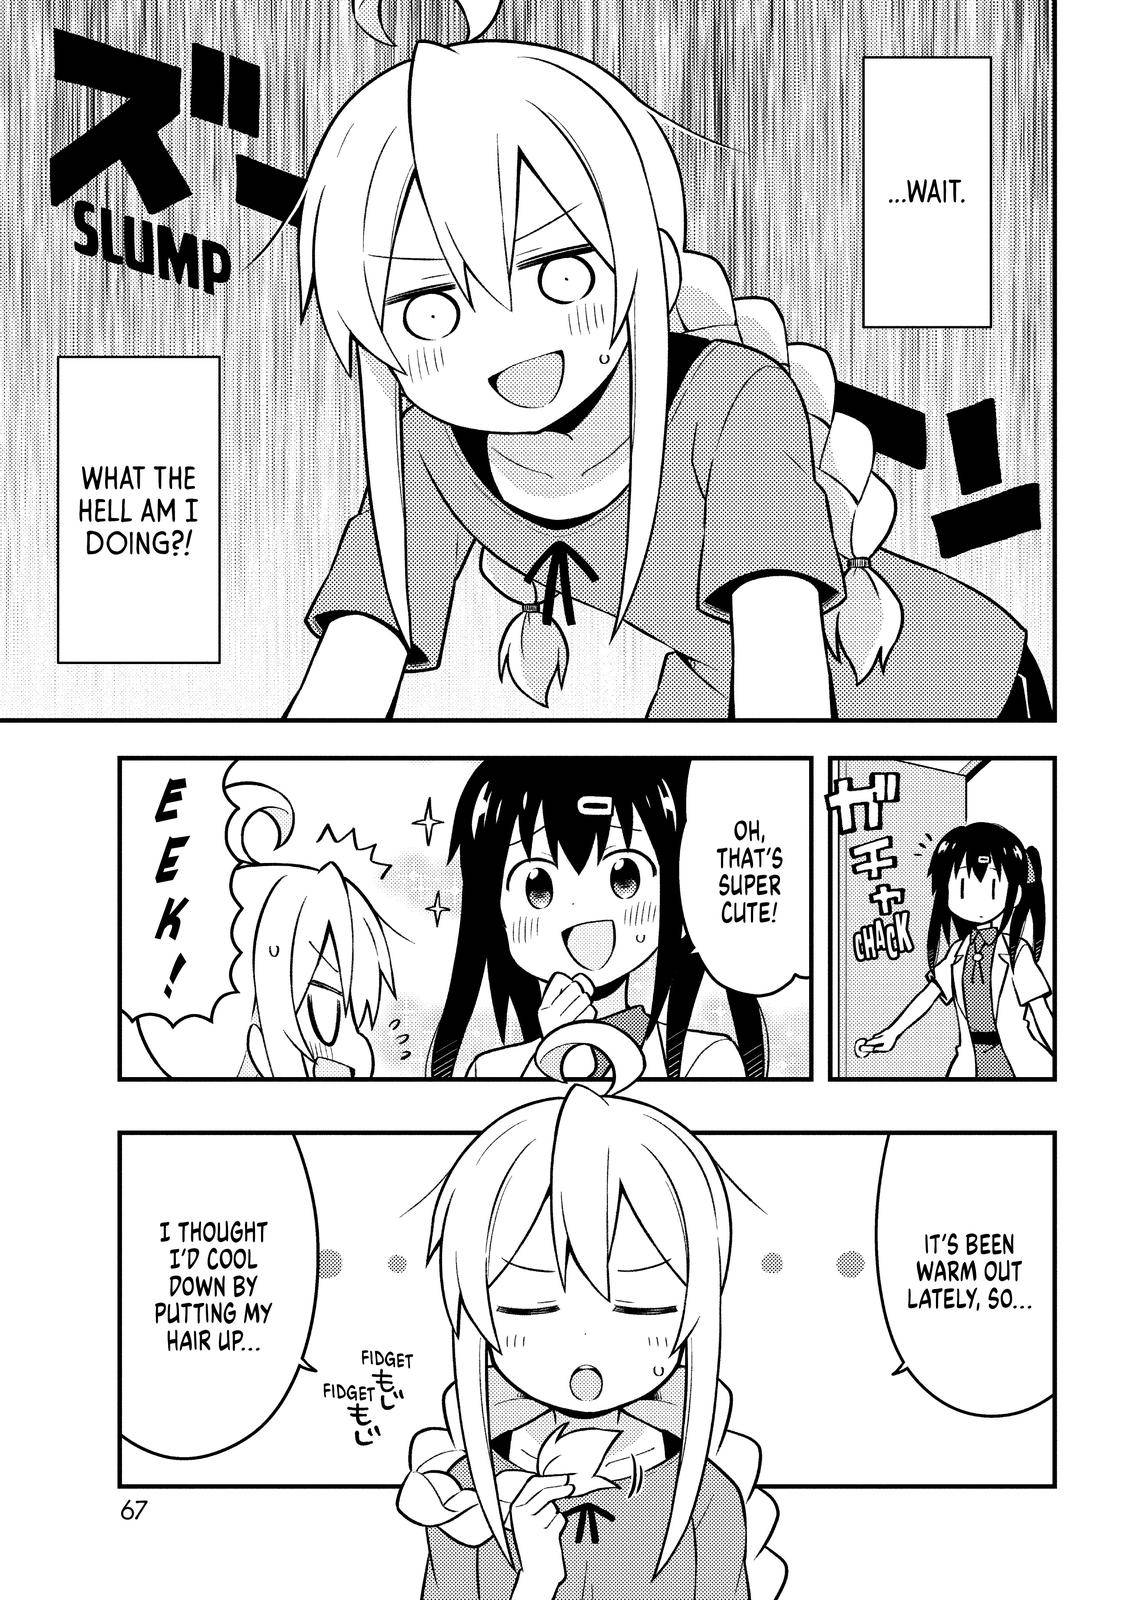 ONIMAI - I'm Now Your Sister! - chapter 5 - #3